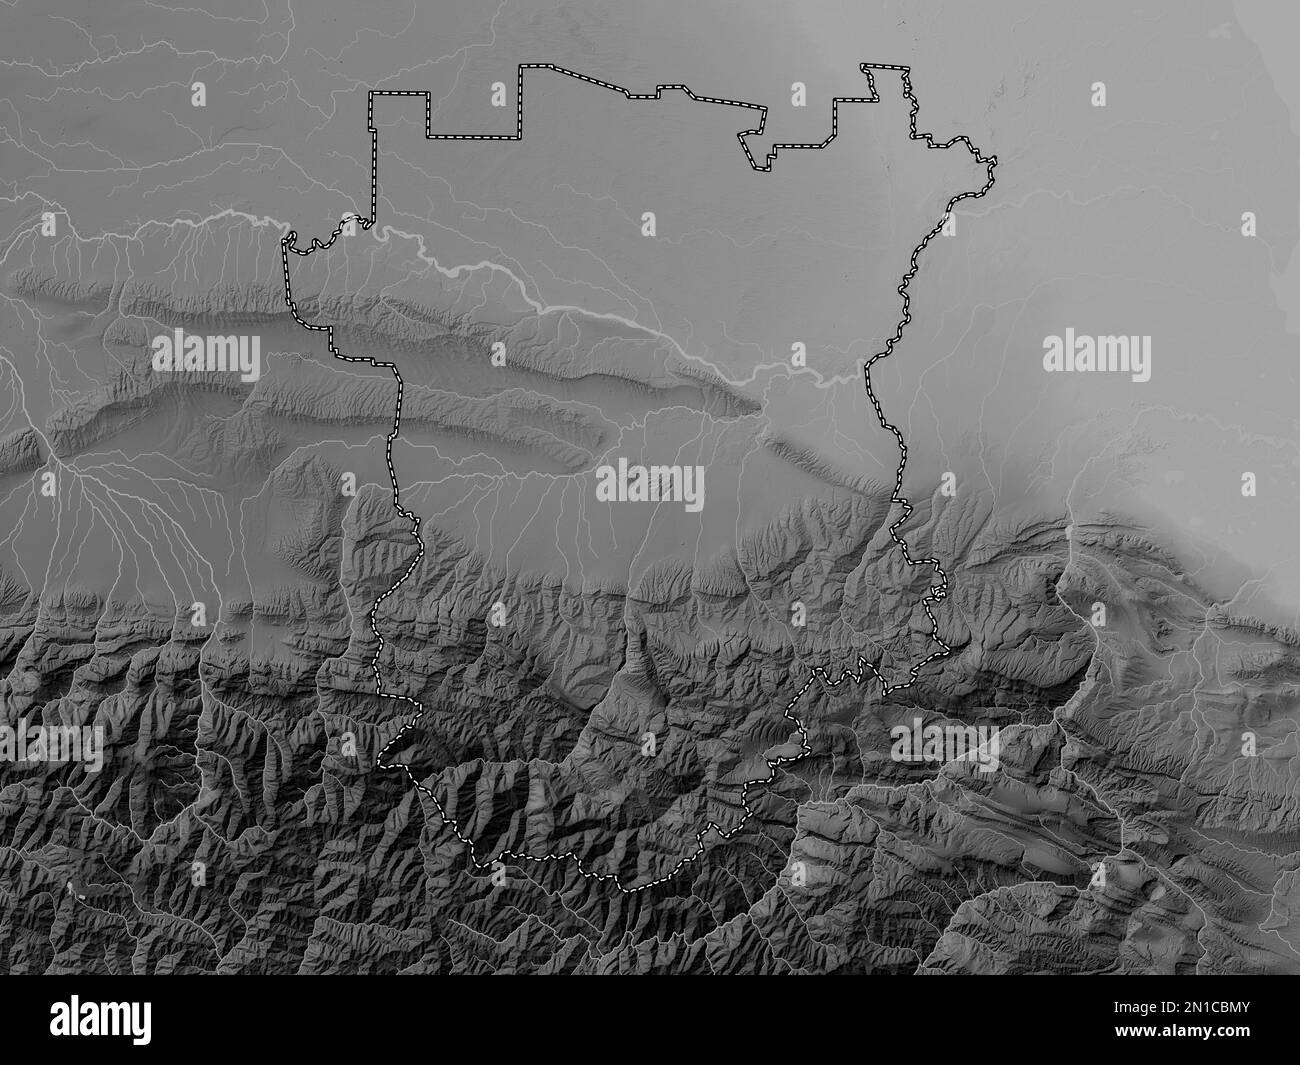 Chechnya, republic of Russia. Grayscale elevation map with lakes and rivers Stock Photo